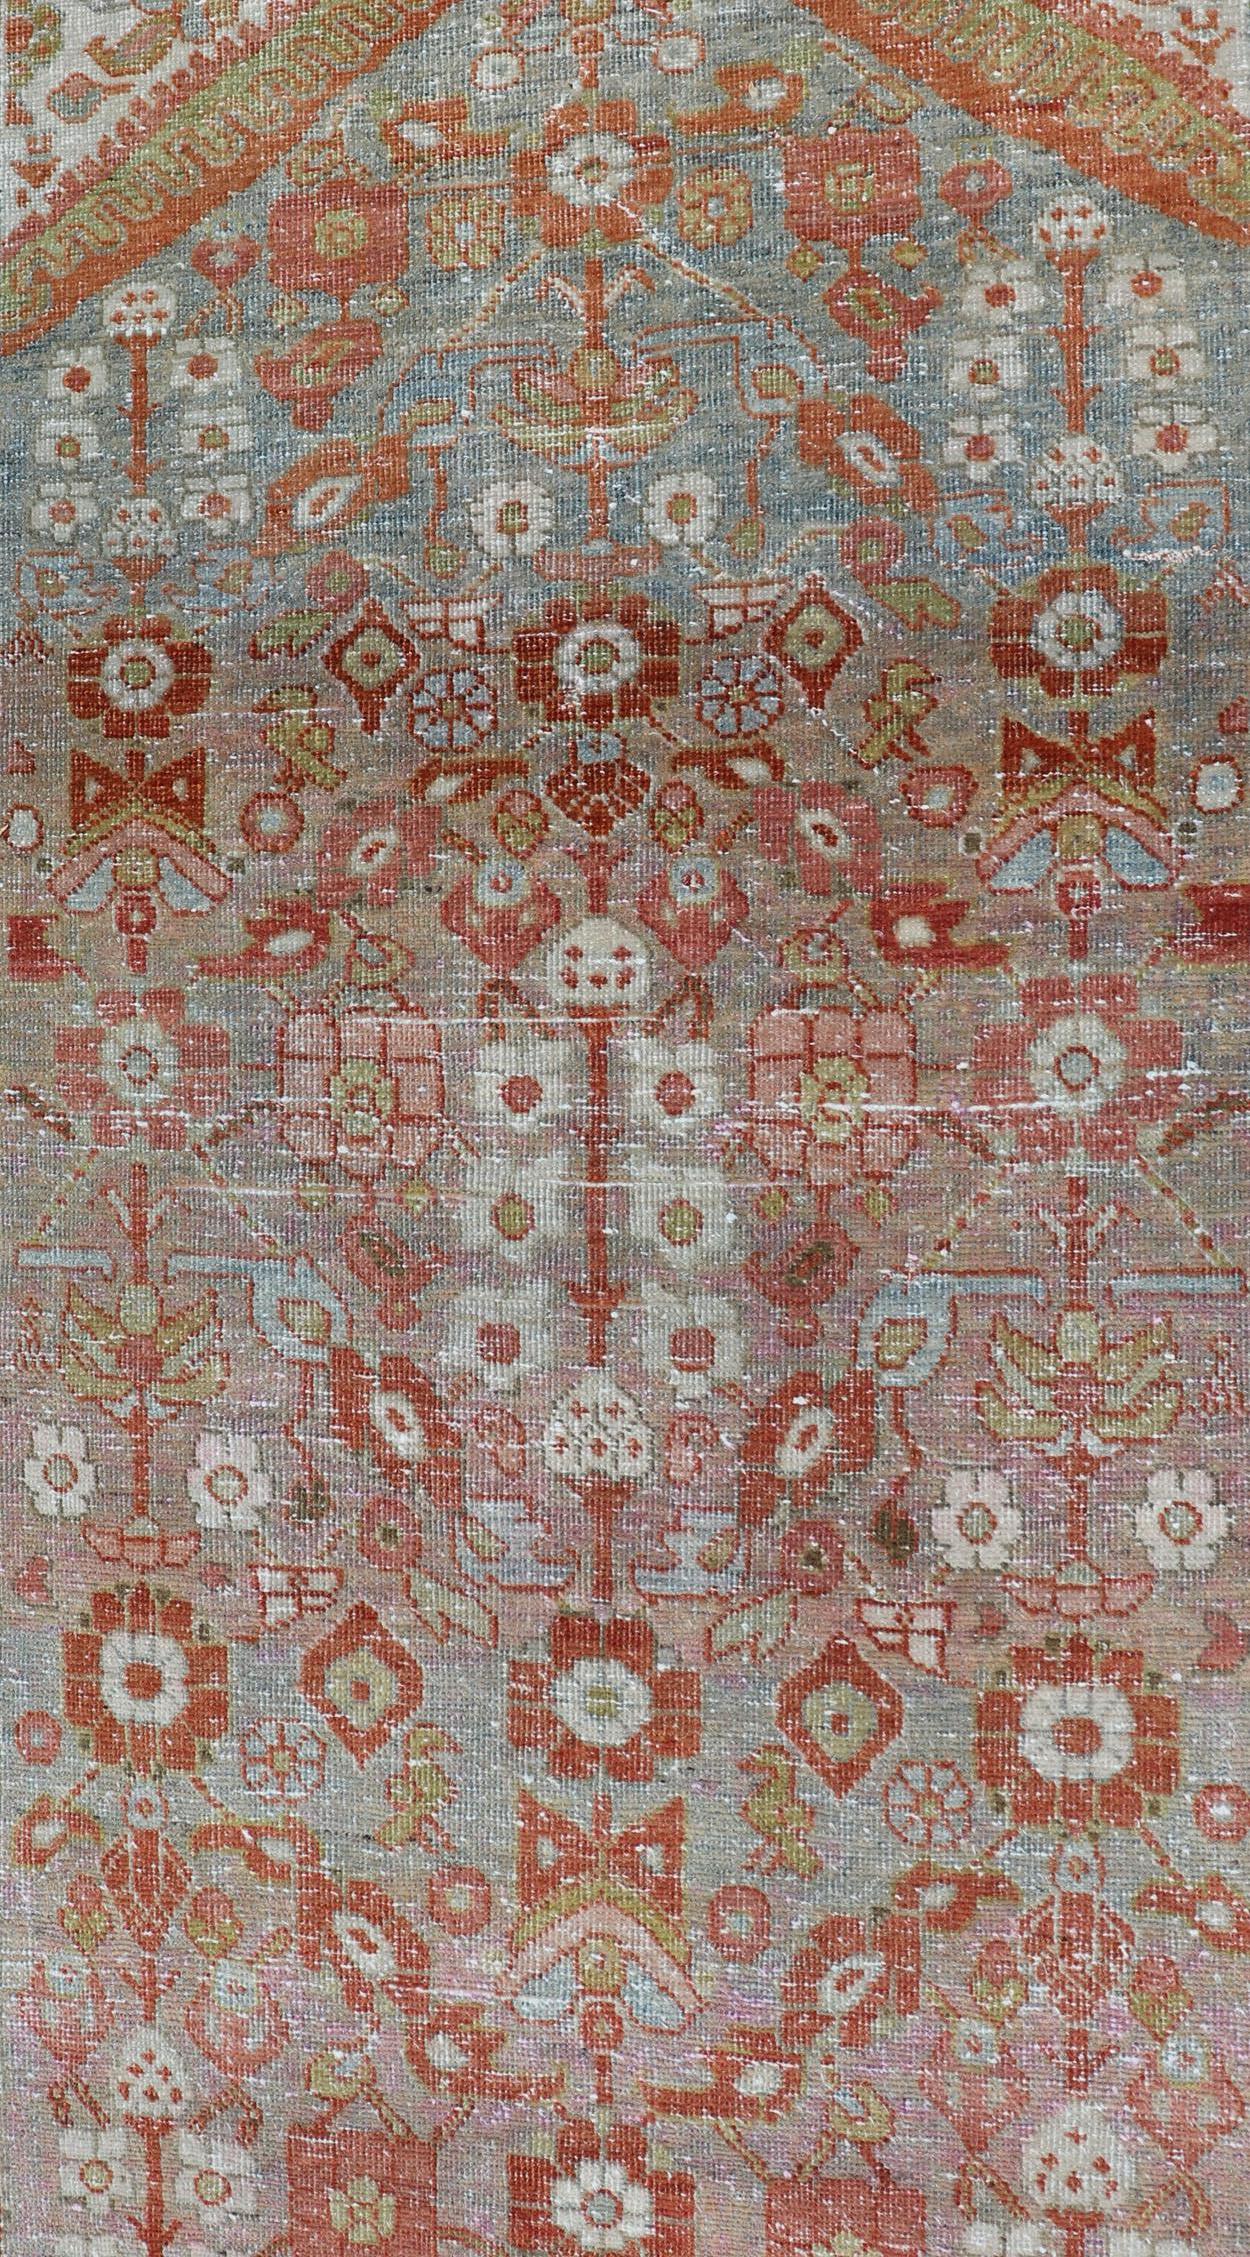 Measures 3'5 x 13'5

This wonderful Persian Mahal features a floral field and a wide array of shades and colors. The border features red and olive green. The field is filled with floral decorations rendered in coral, red, ivory, olive, light blue